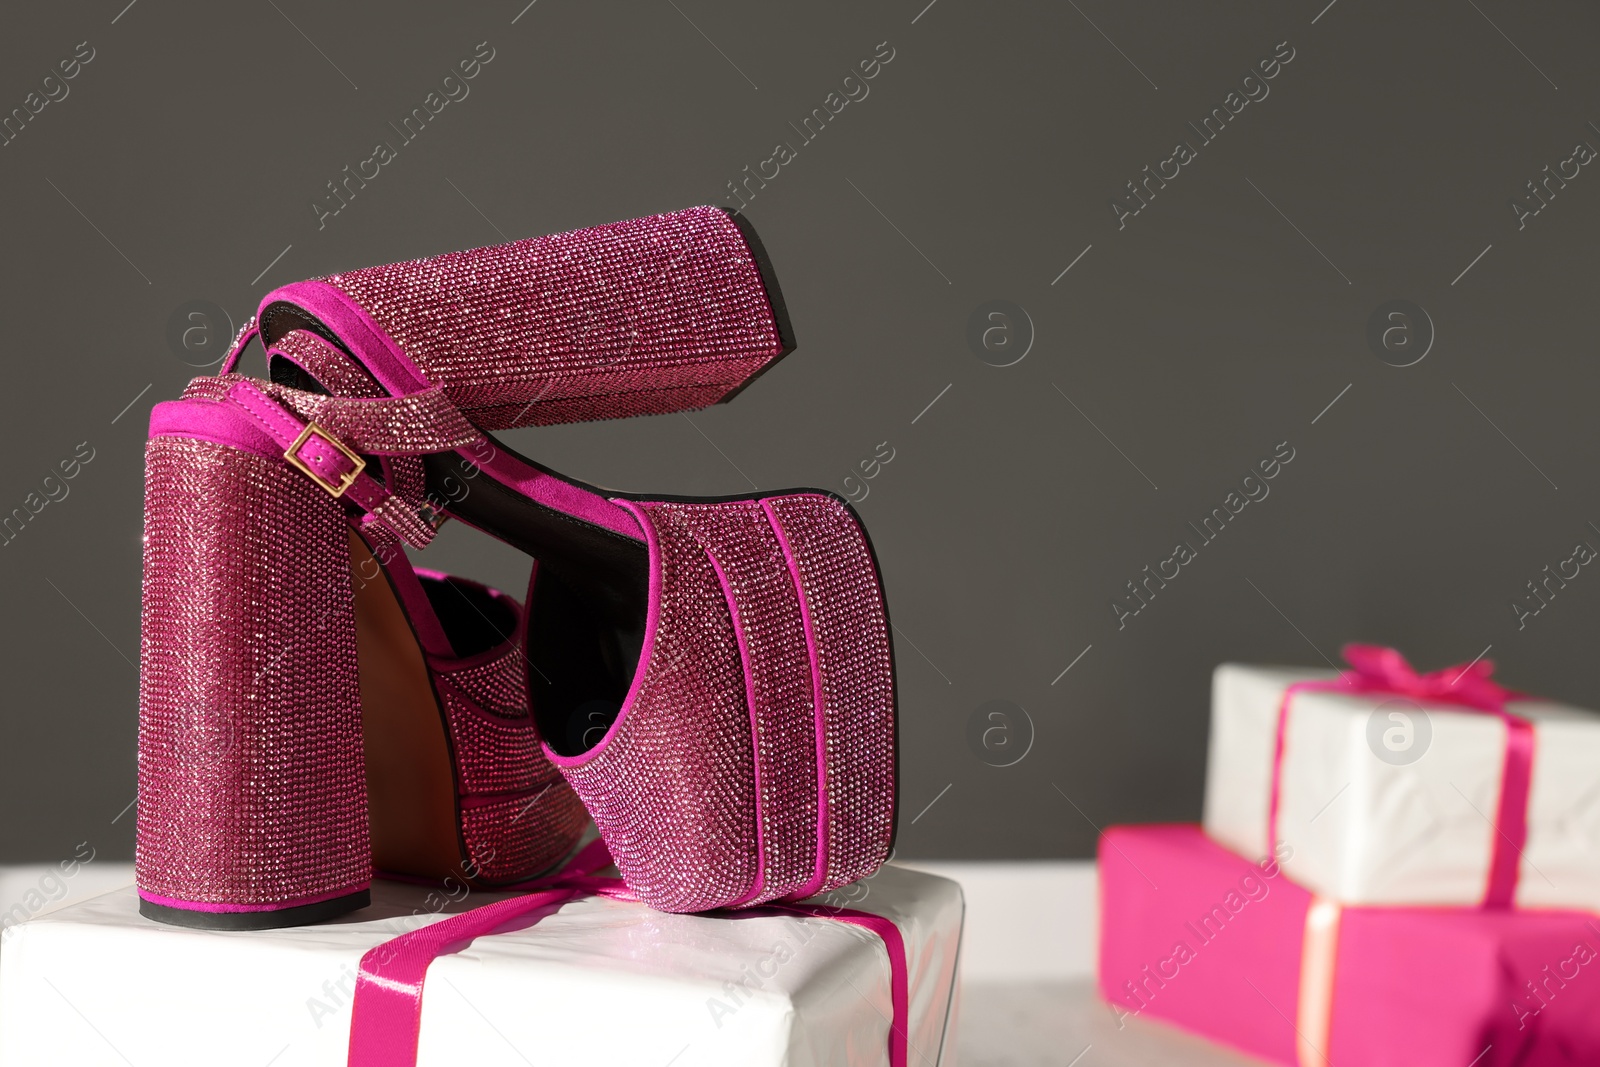 Photo of Stylish presentation of pink high heeled shoes with platform and square toes on gift box indoors. Space for text